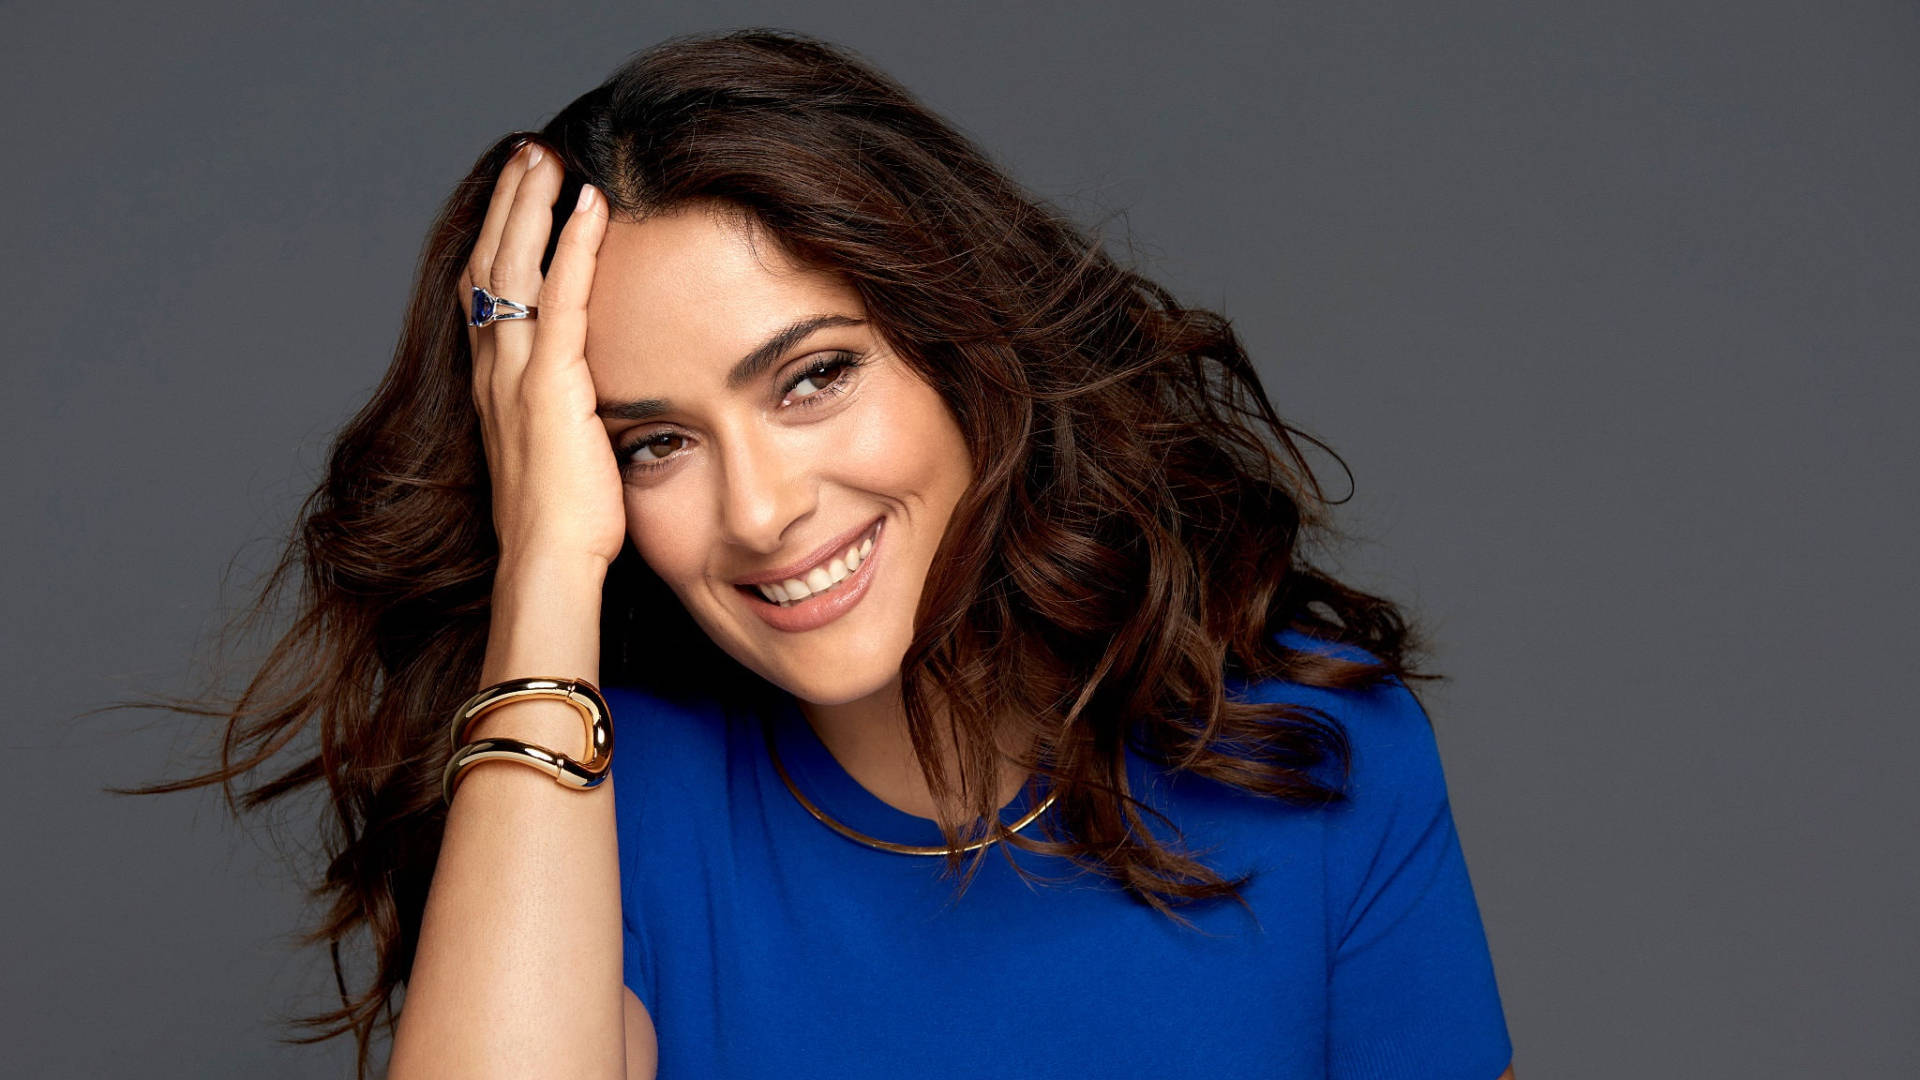 Salmahayek Blå Outfit. (this Is Already In Swedish. It Means 